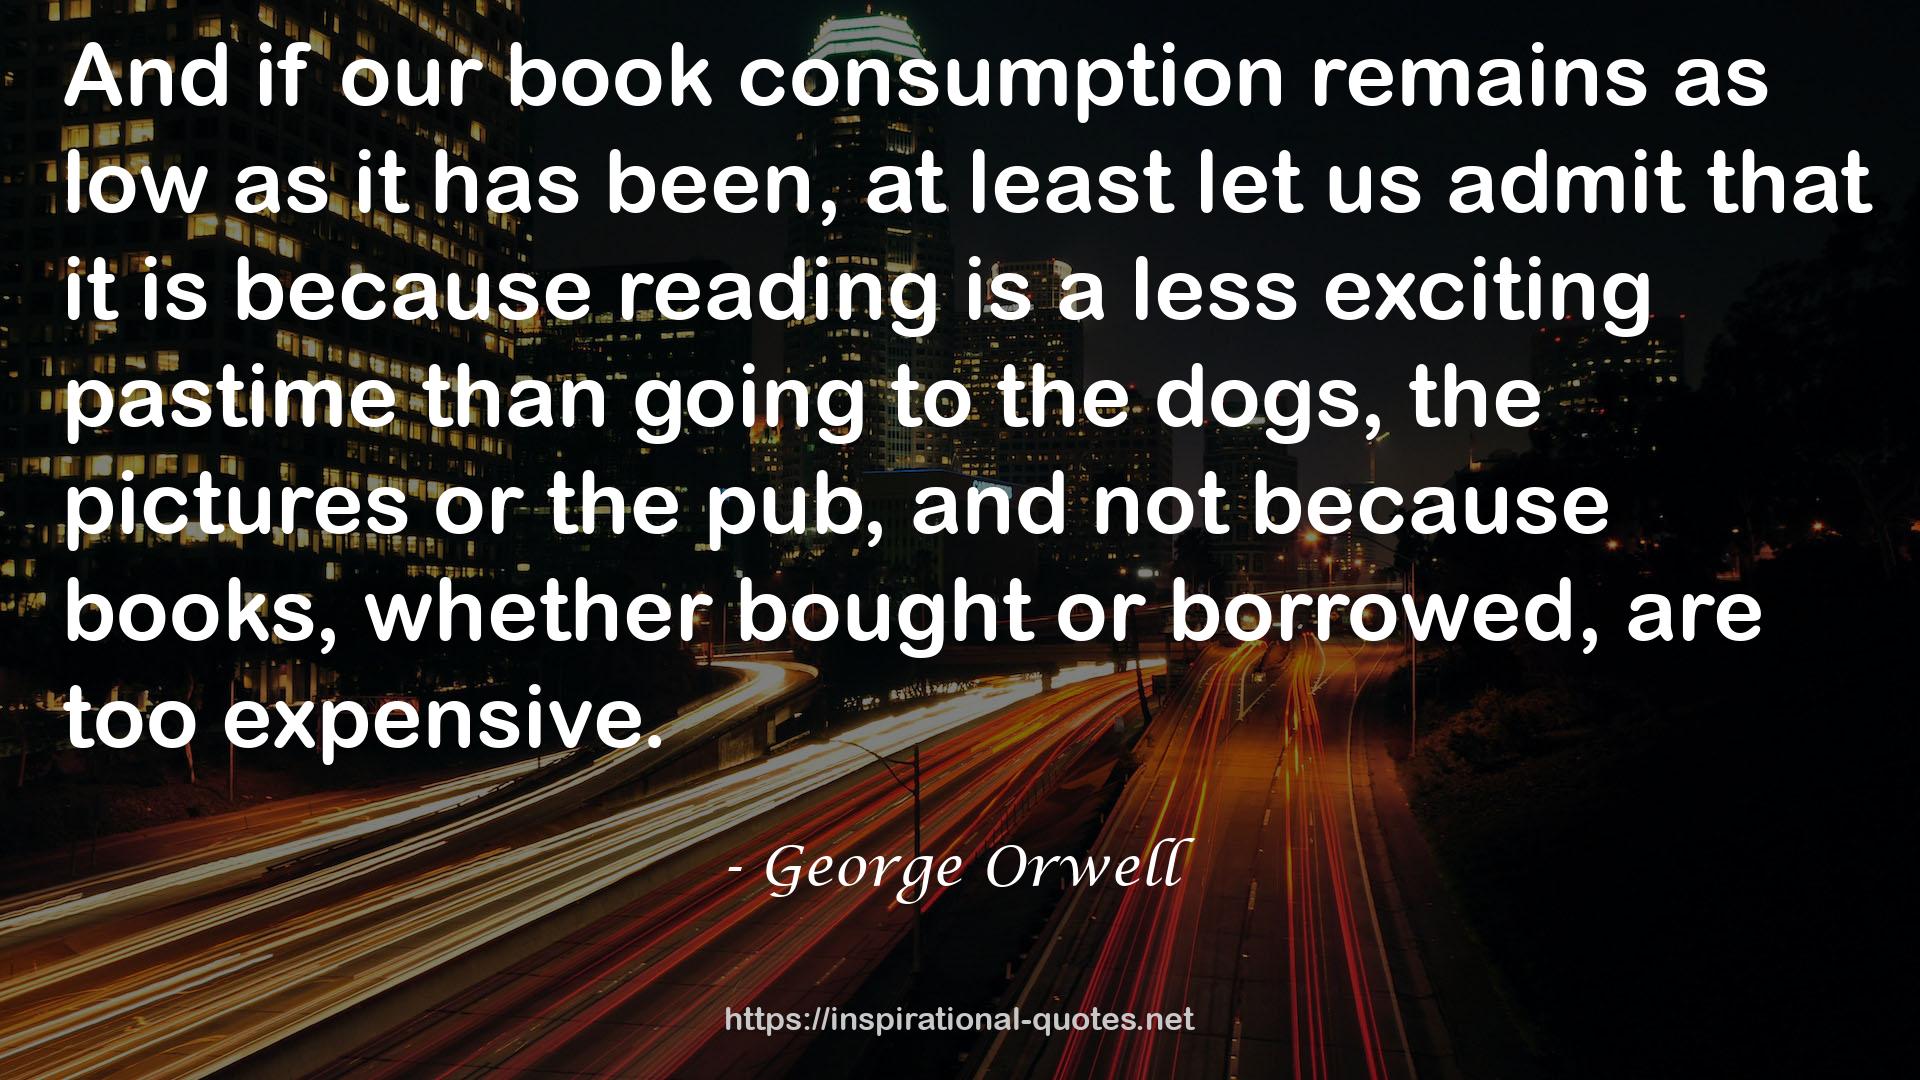 George Orwell QUOTES